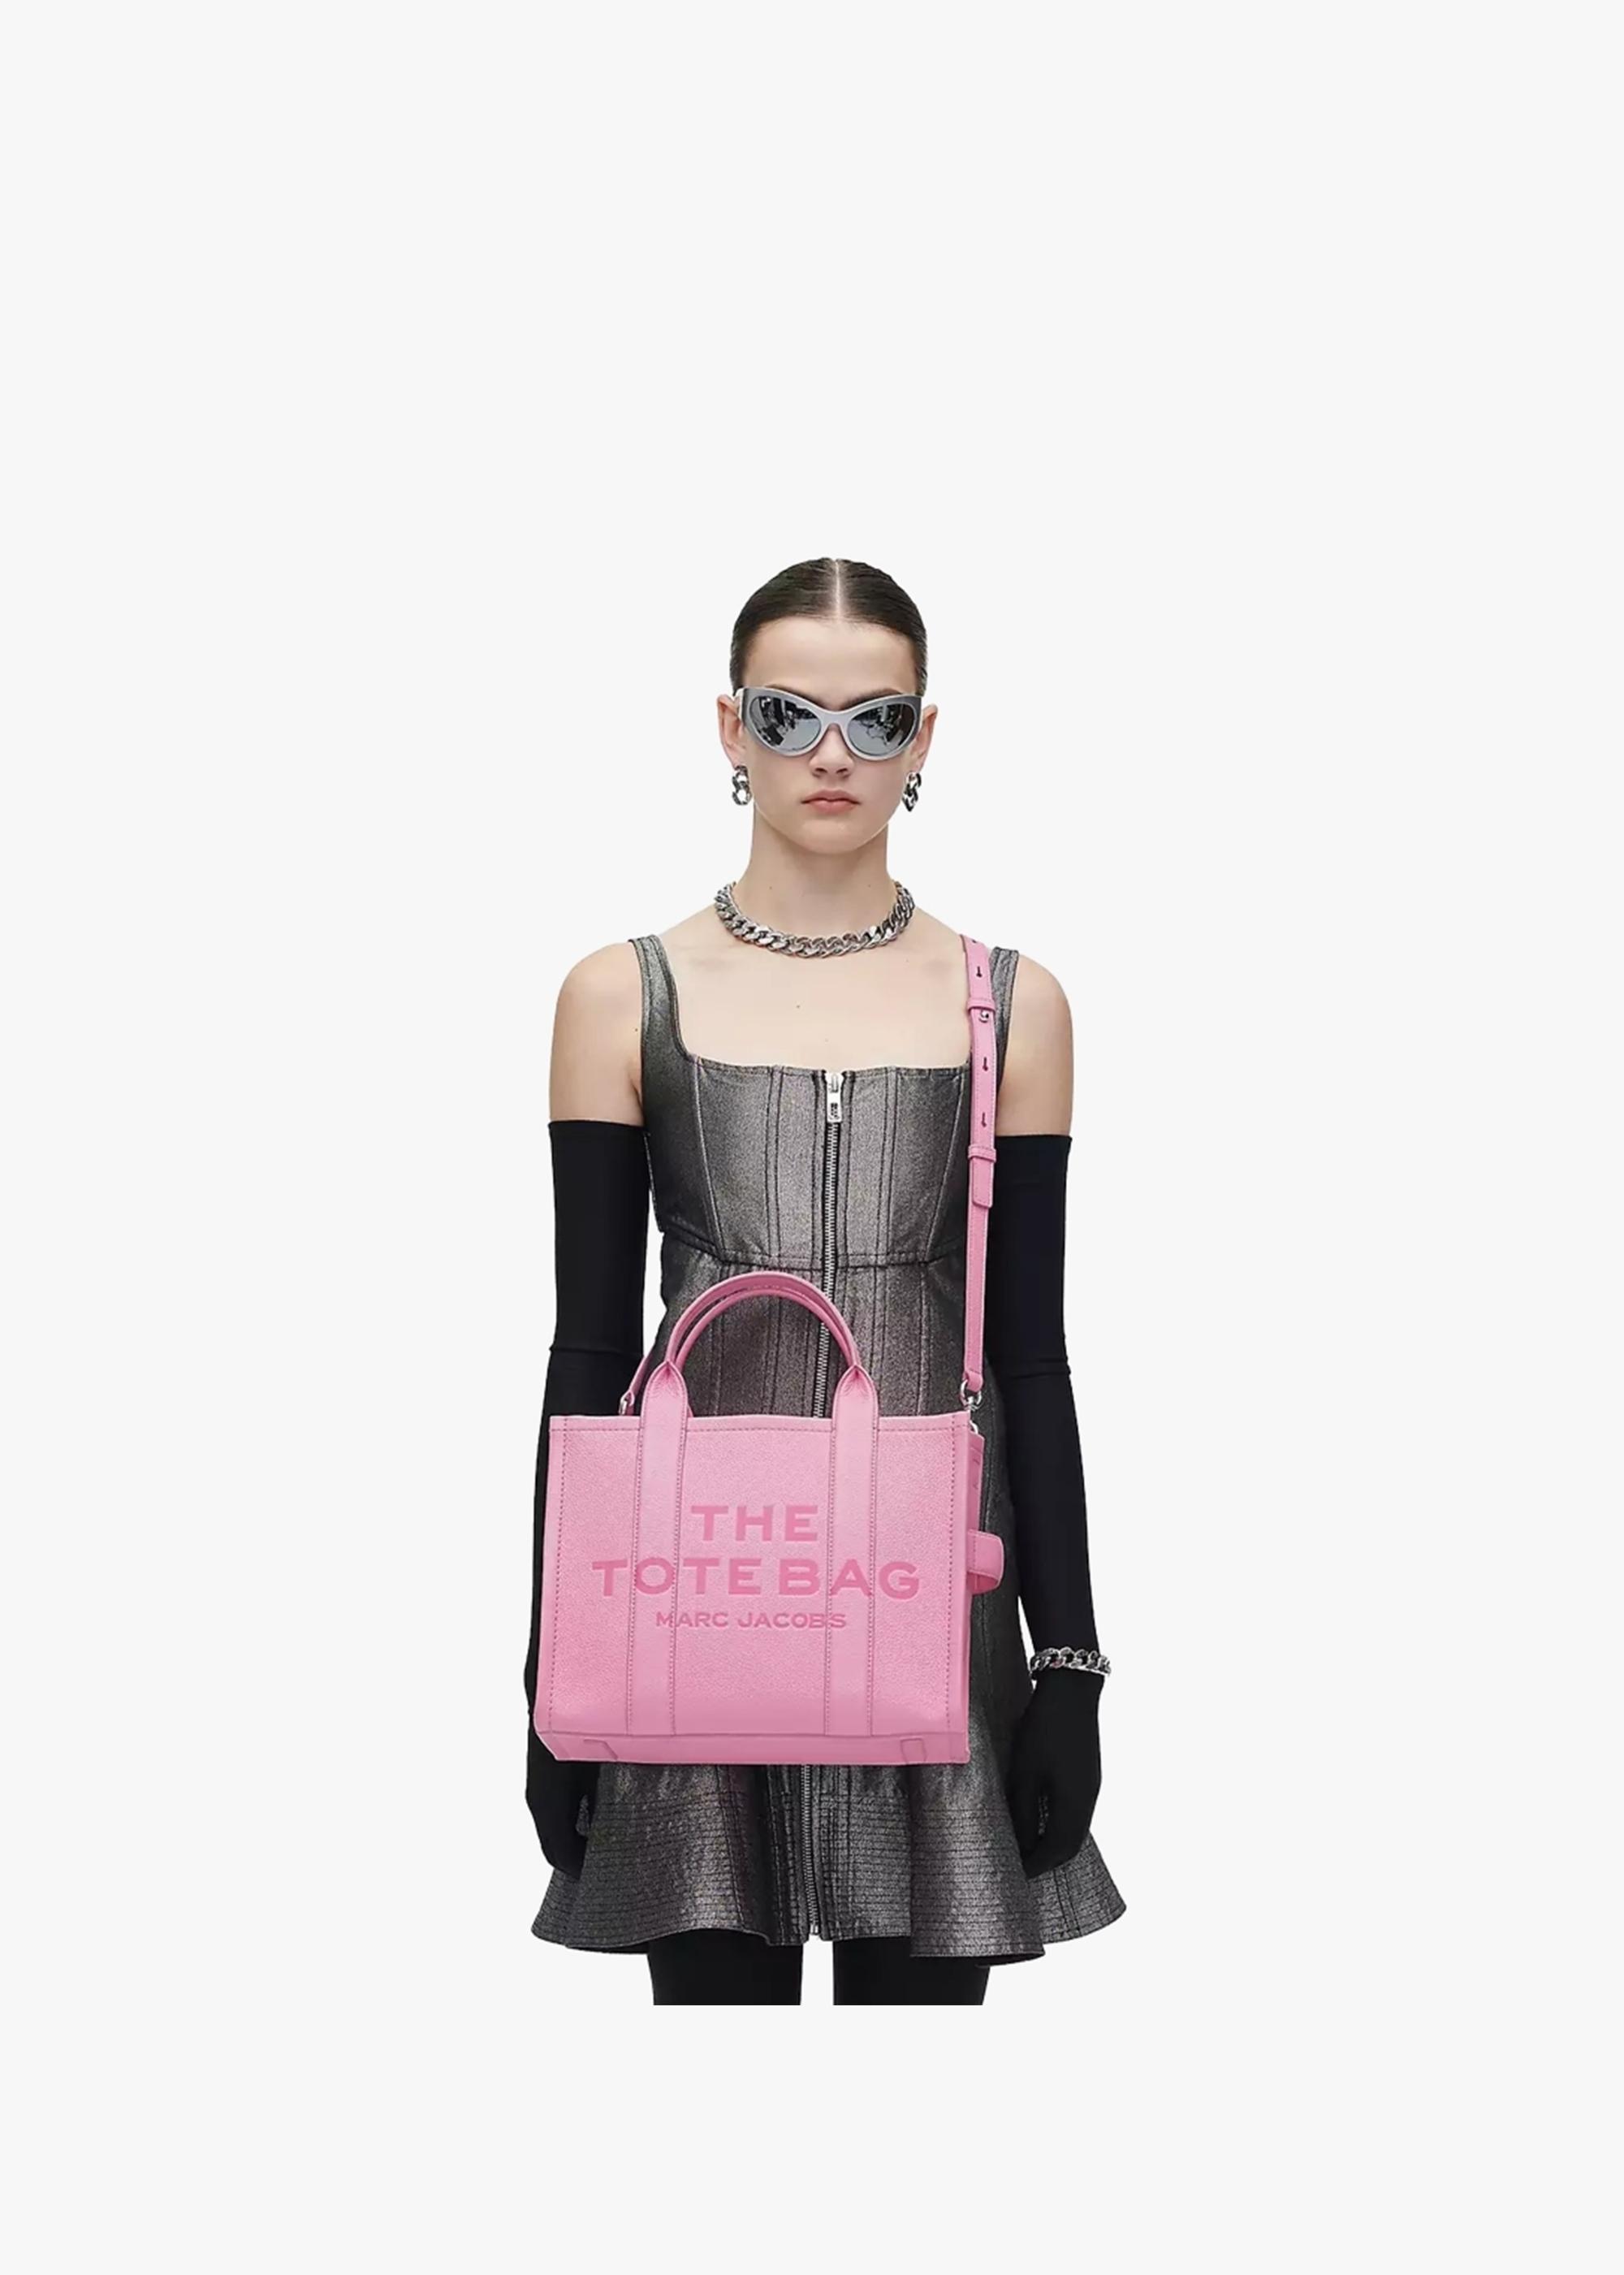 Marc Jacobs The Leather Medium Tote Bag in Pink